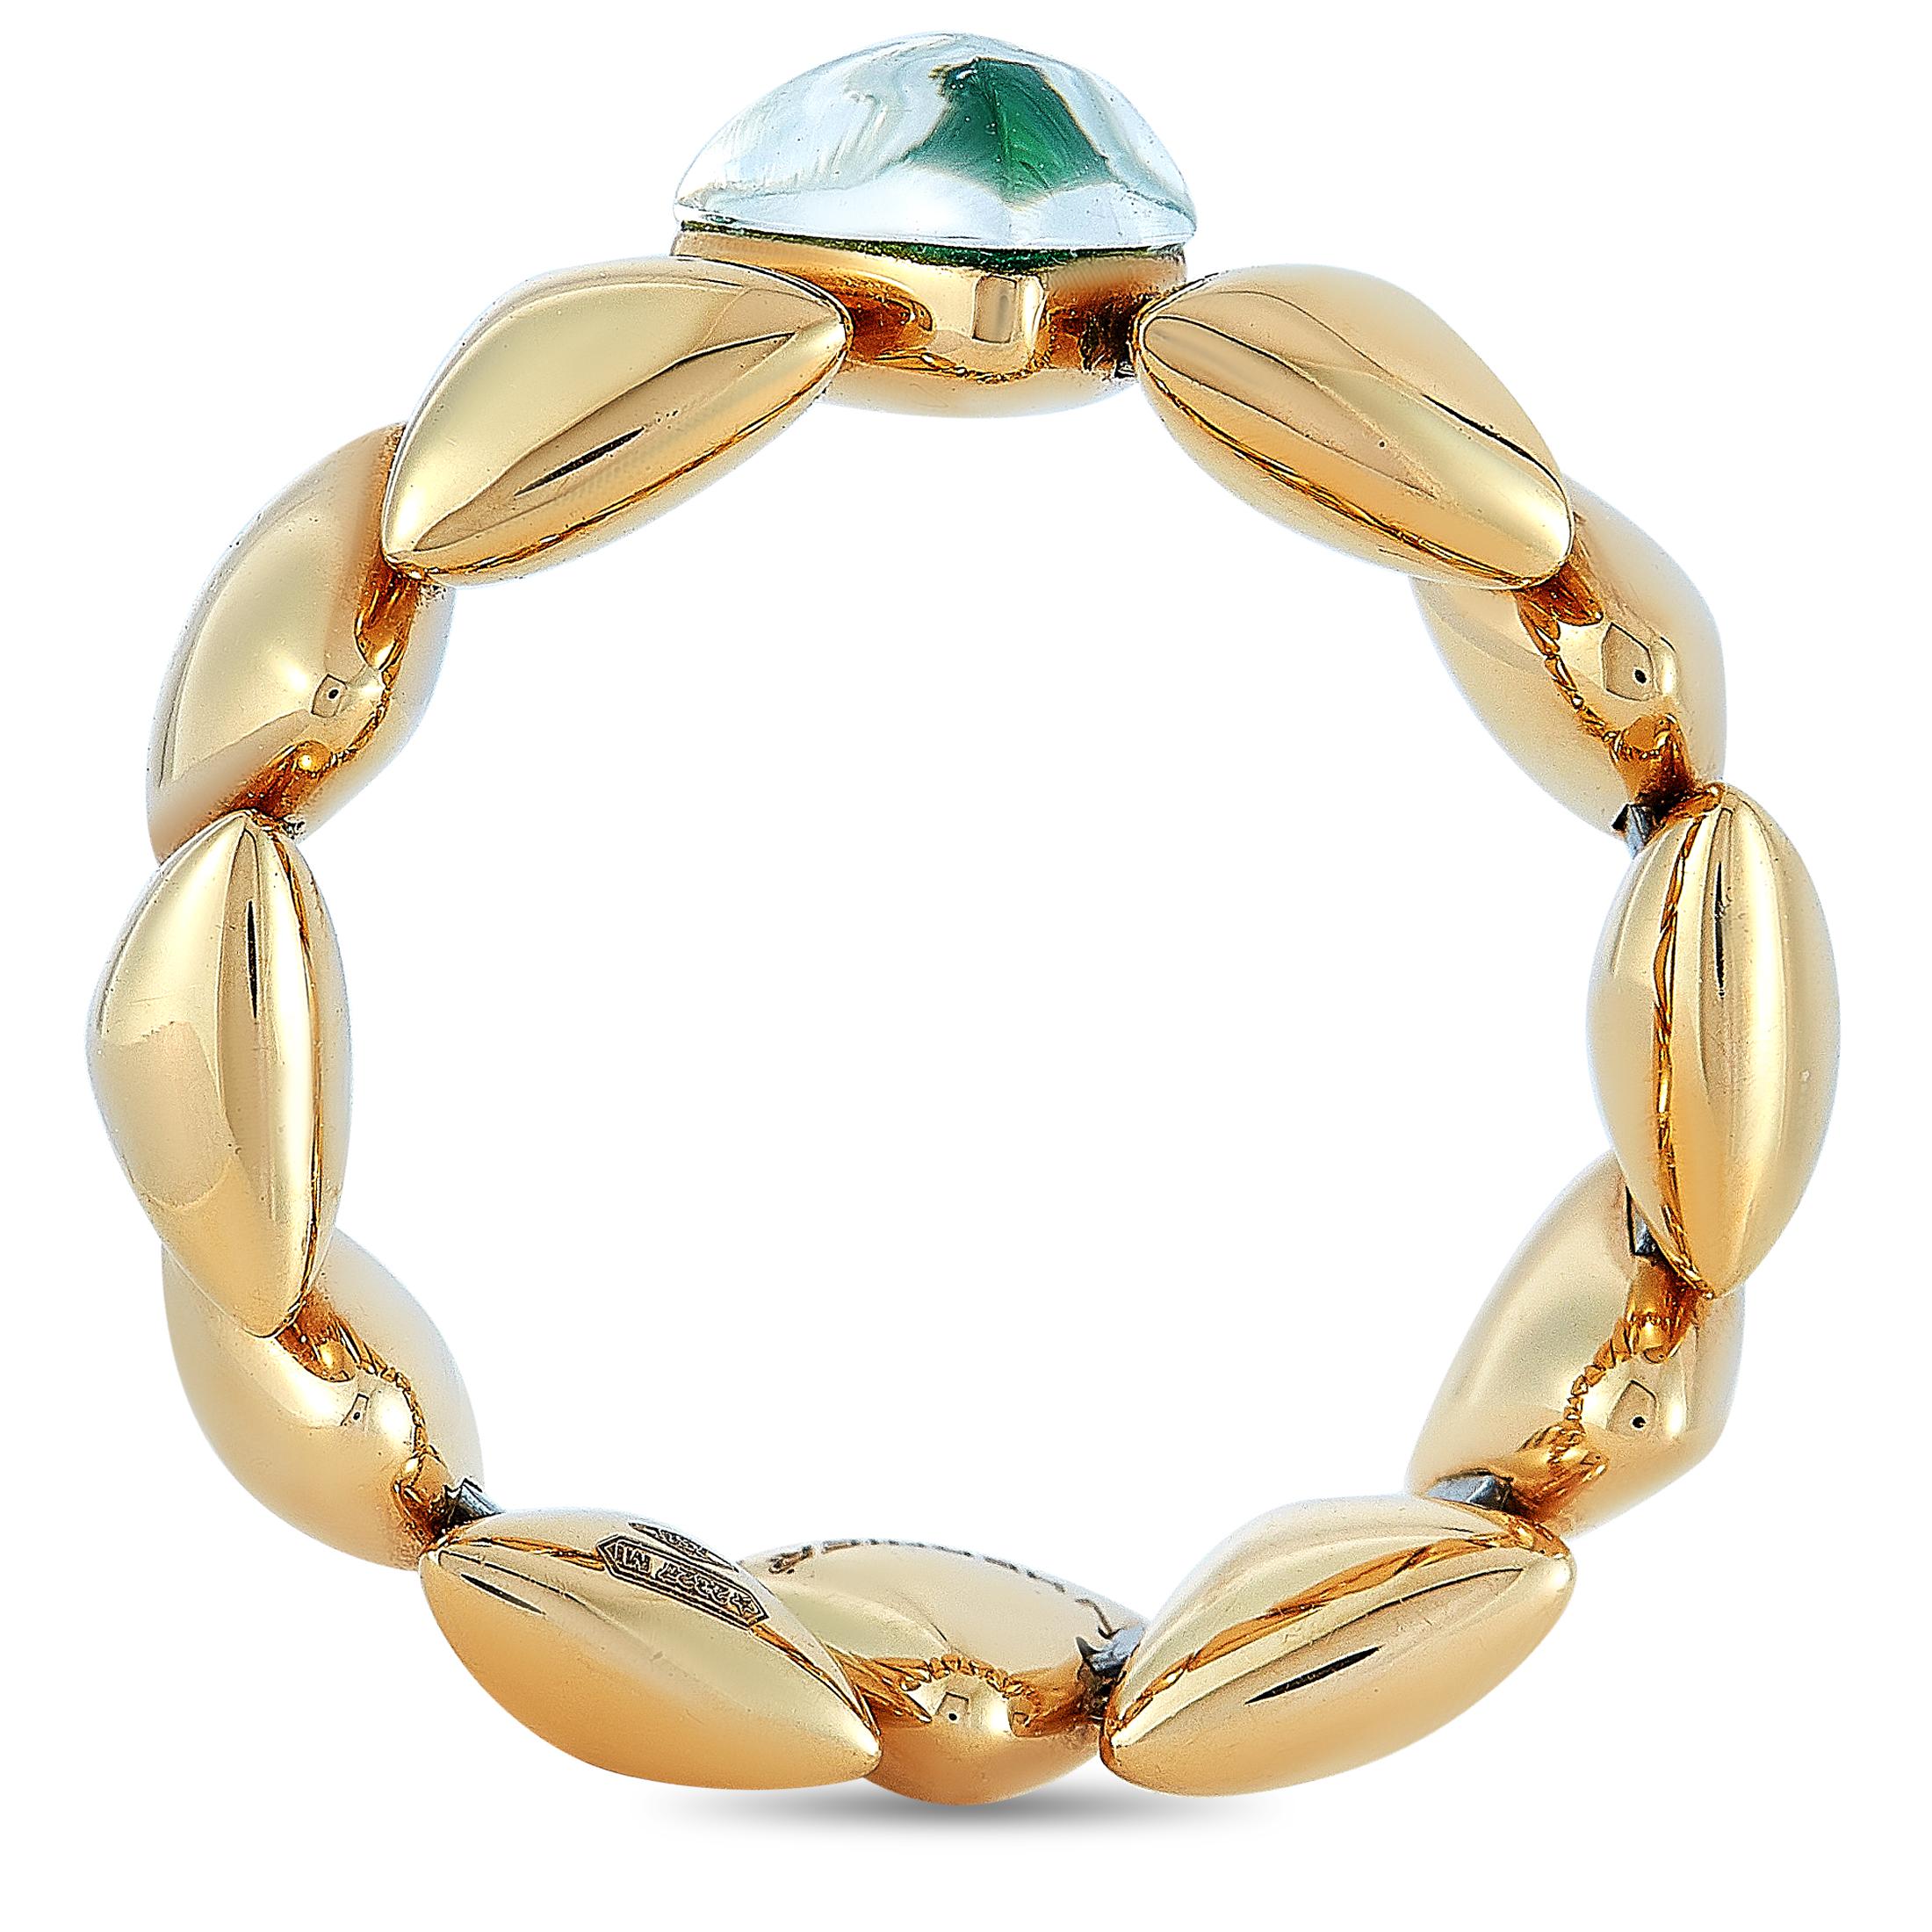 The Vhernier “Freccia Micro” ring is made out of 18K rose gold and titanium and embellished with jade and rock crystal. The ring weighs 9.7 grams and boasts band thickness of 5 mm and top height of 4 mm, while top dimensions measure 6 by 6 mm.
Ring